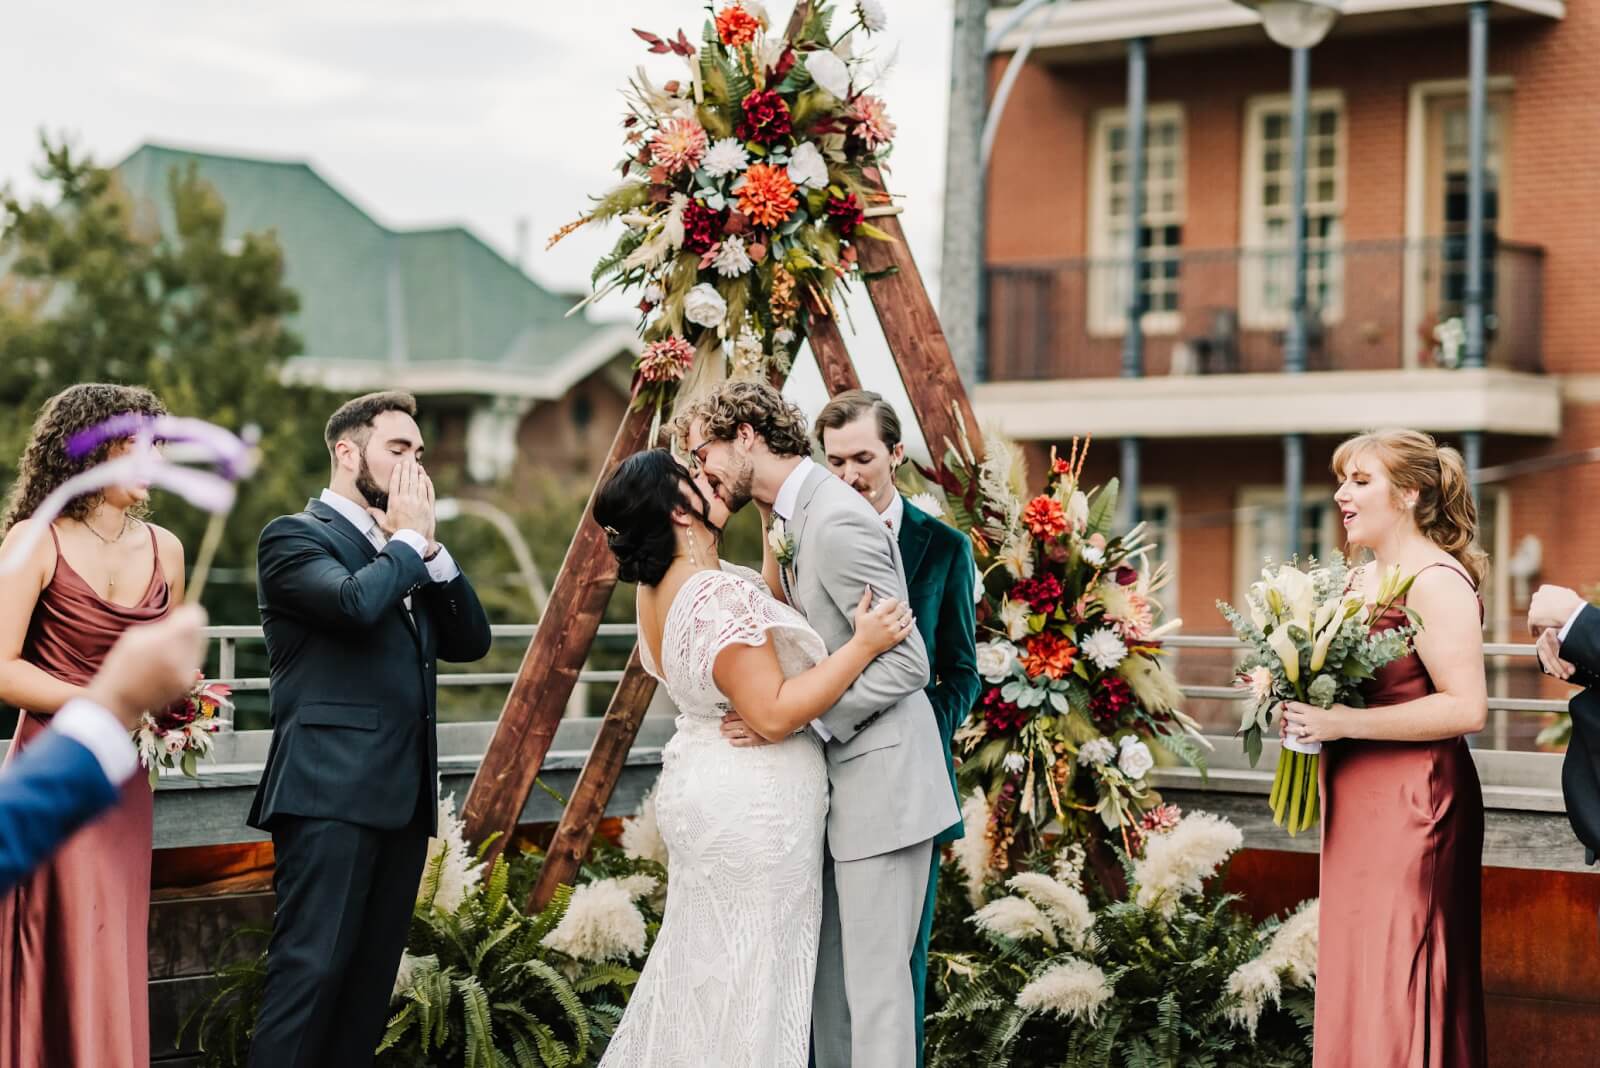 This Memphis Rooftop Wedding Is the Ultimate Happy Ending